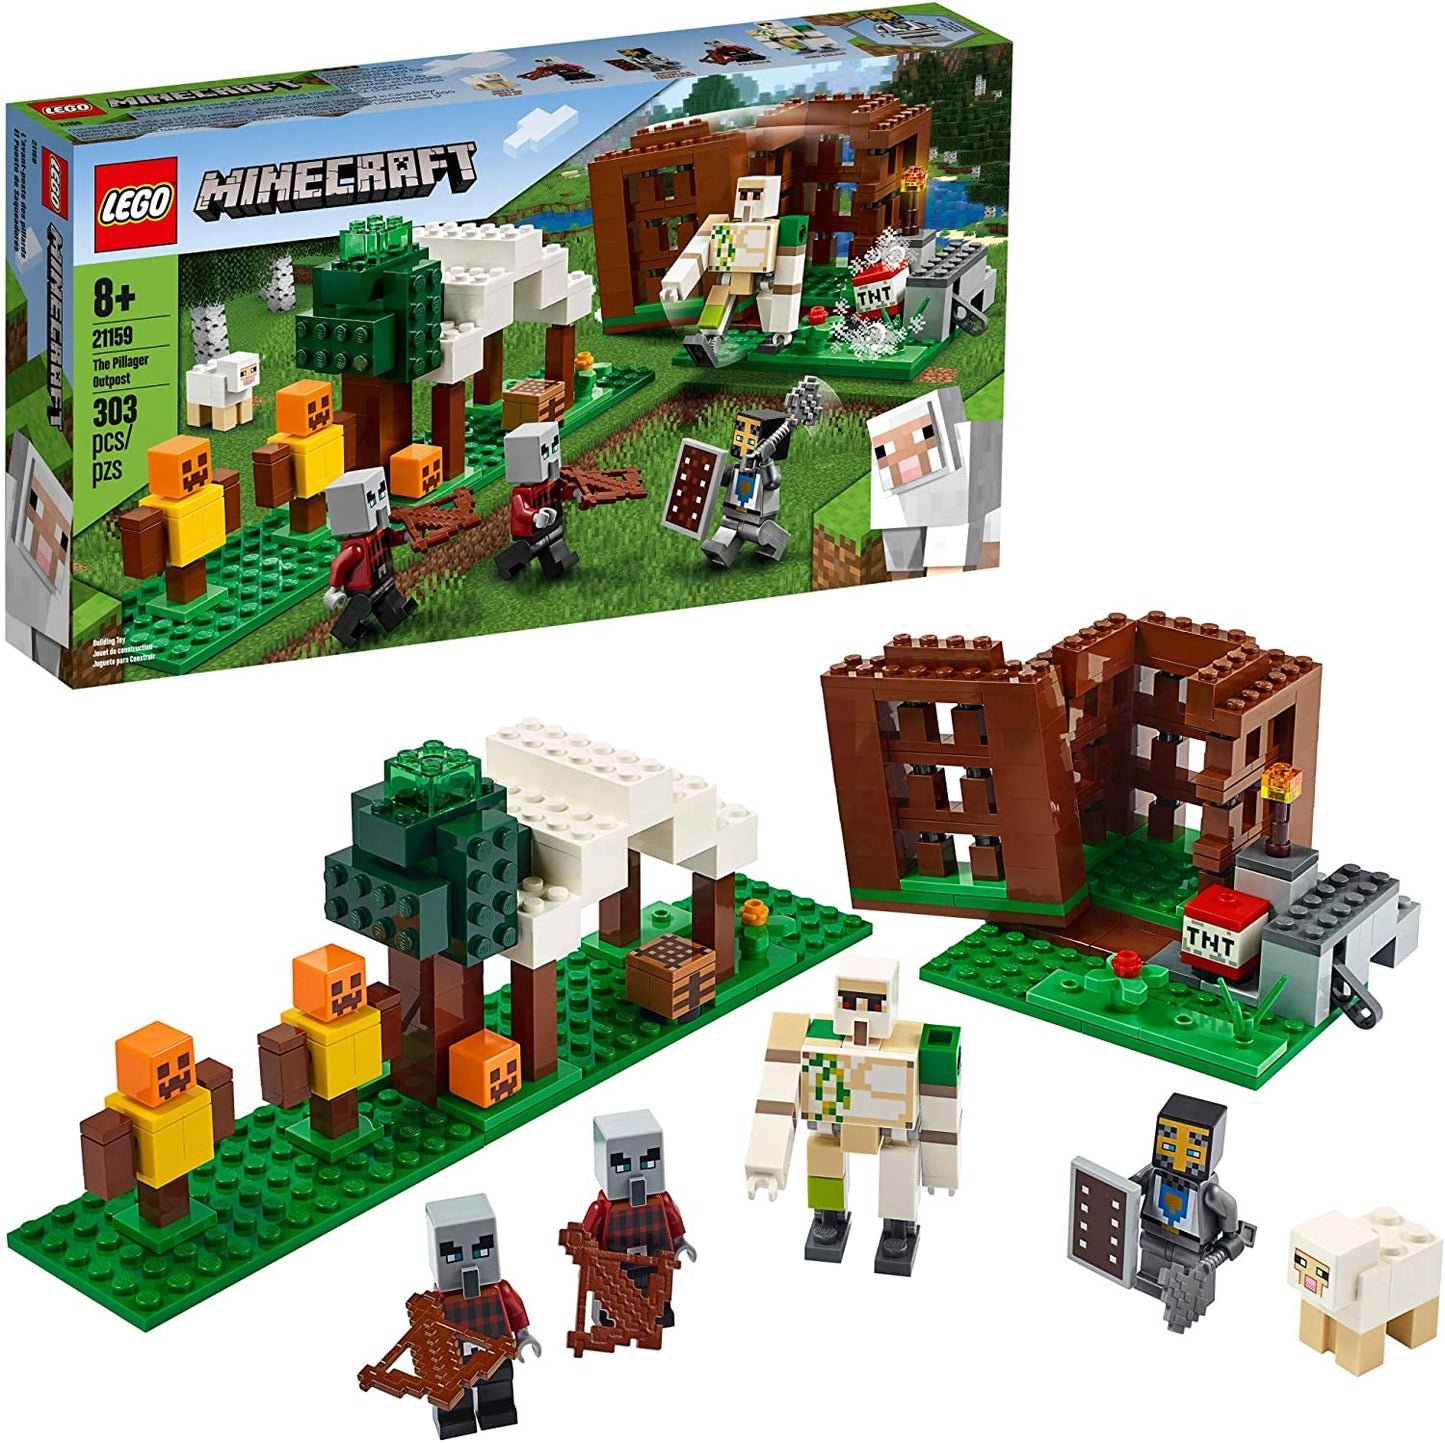 LEGO Minecraft The Pillager Outpost 21159 Awesome Action Figure Brick Building Playset for Kids Minecraft Gift, New 2020 (303 Pieces)